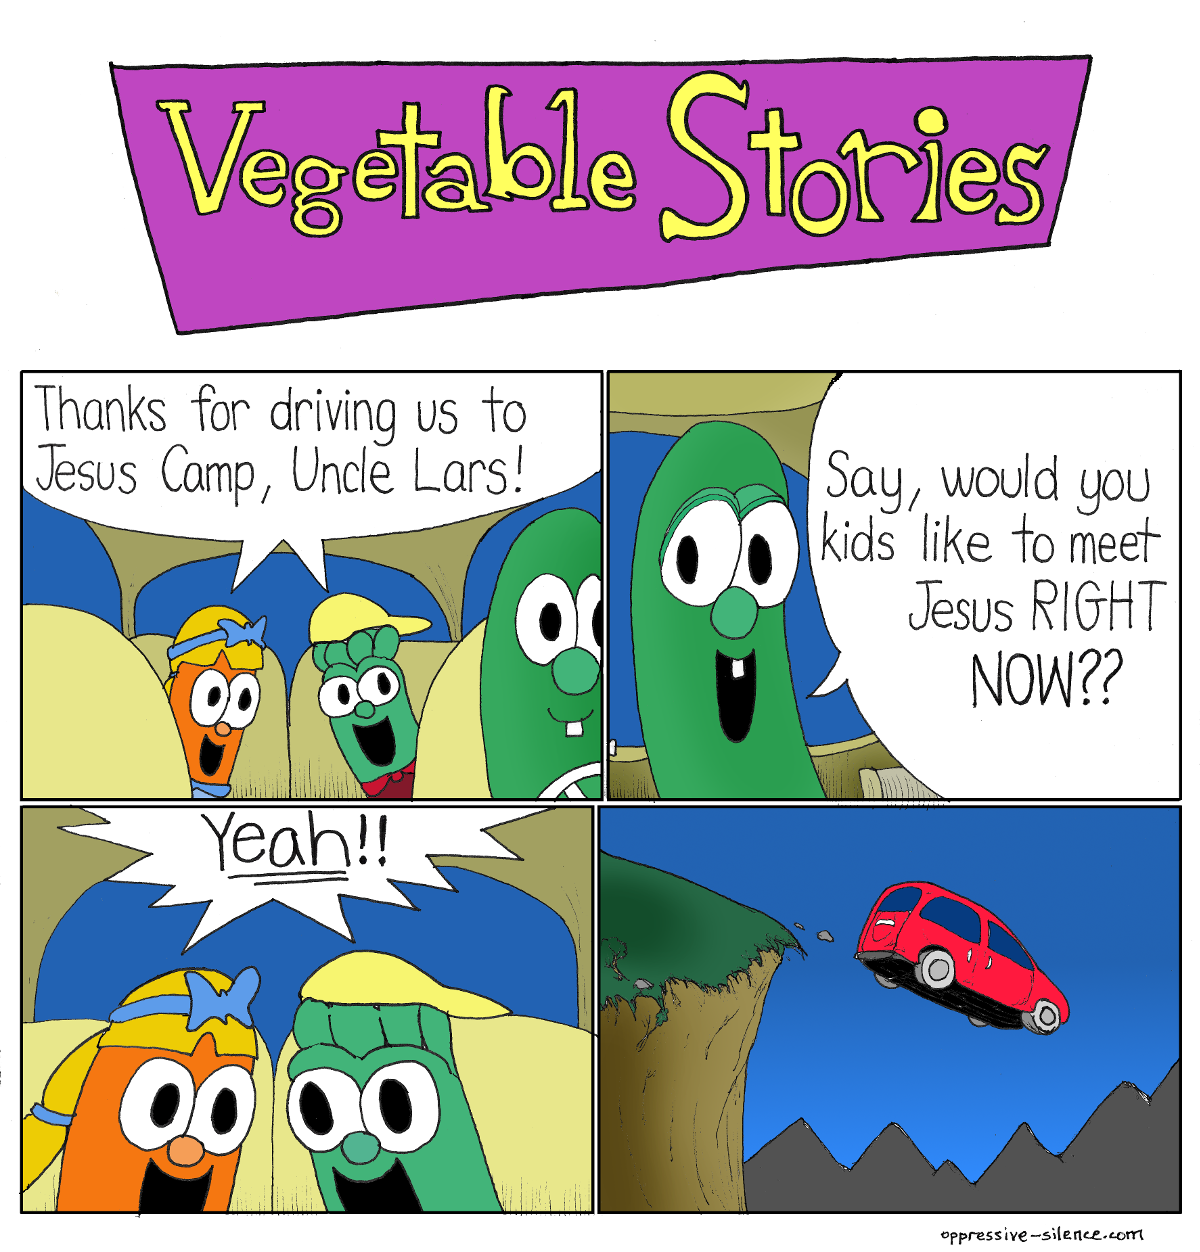 vegetable stories meme - Vegetable Stories Thanks for driving us to Jesus Camp, Uncle Lars! Say, would you | kids to meet Jesus Right Now?? Yeah!!